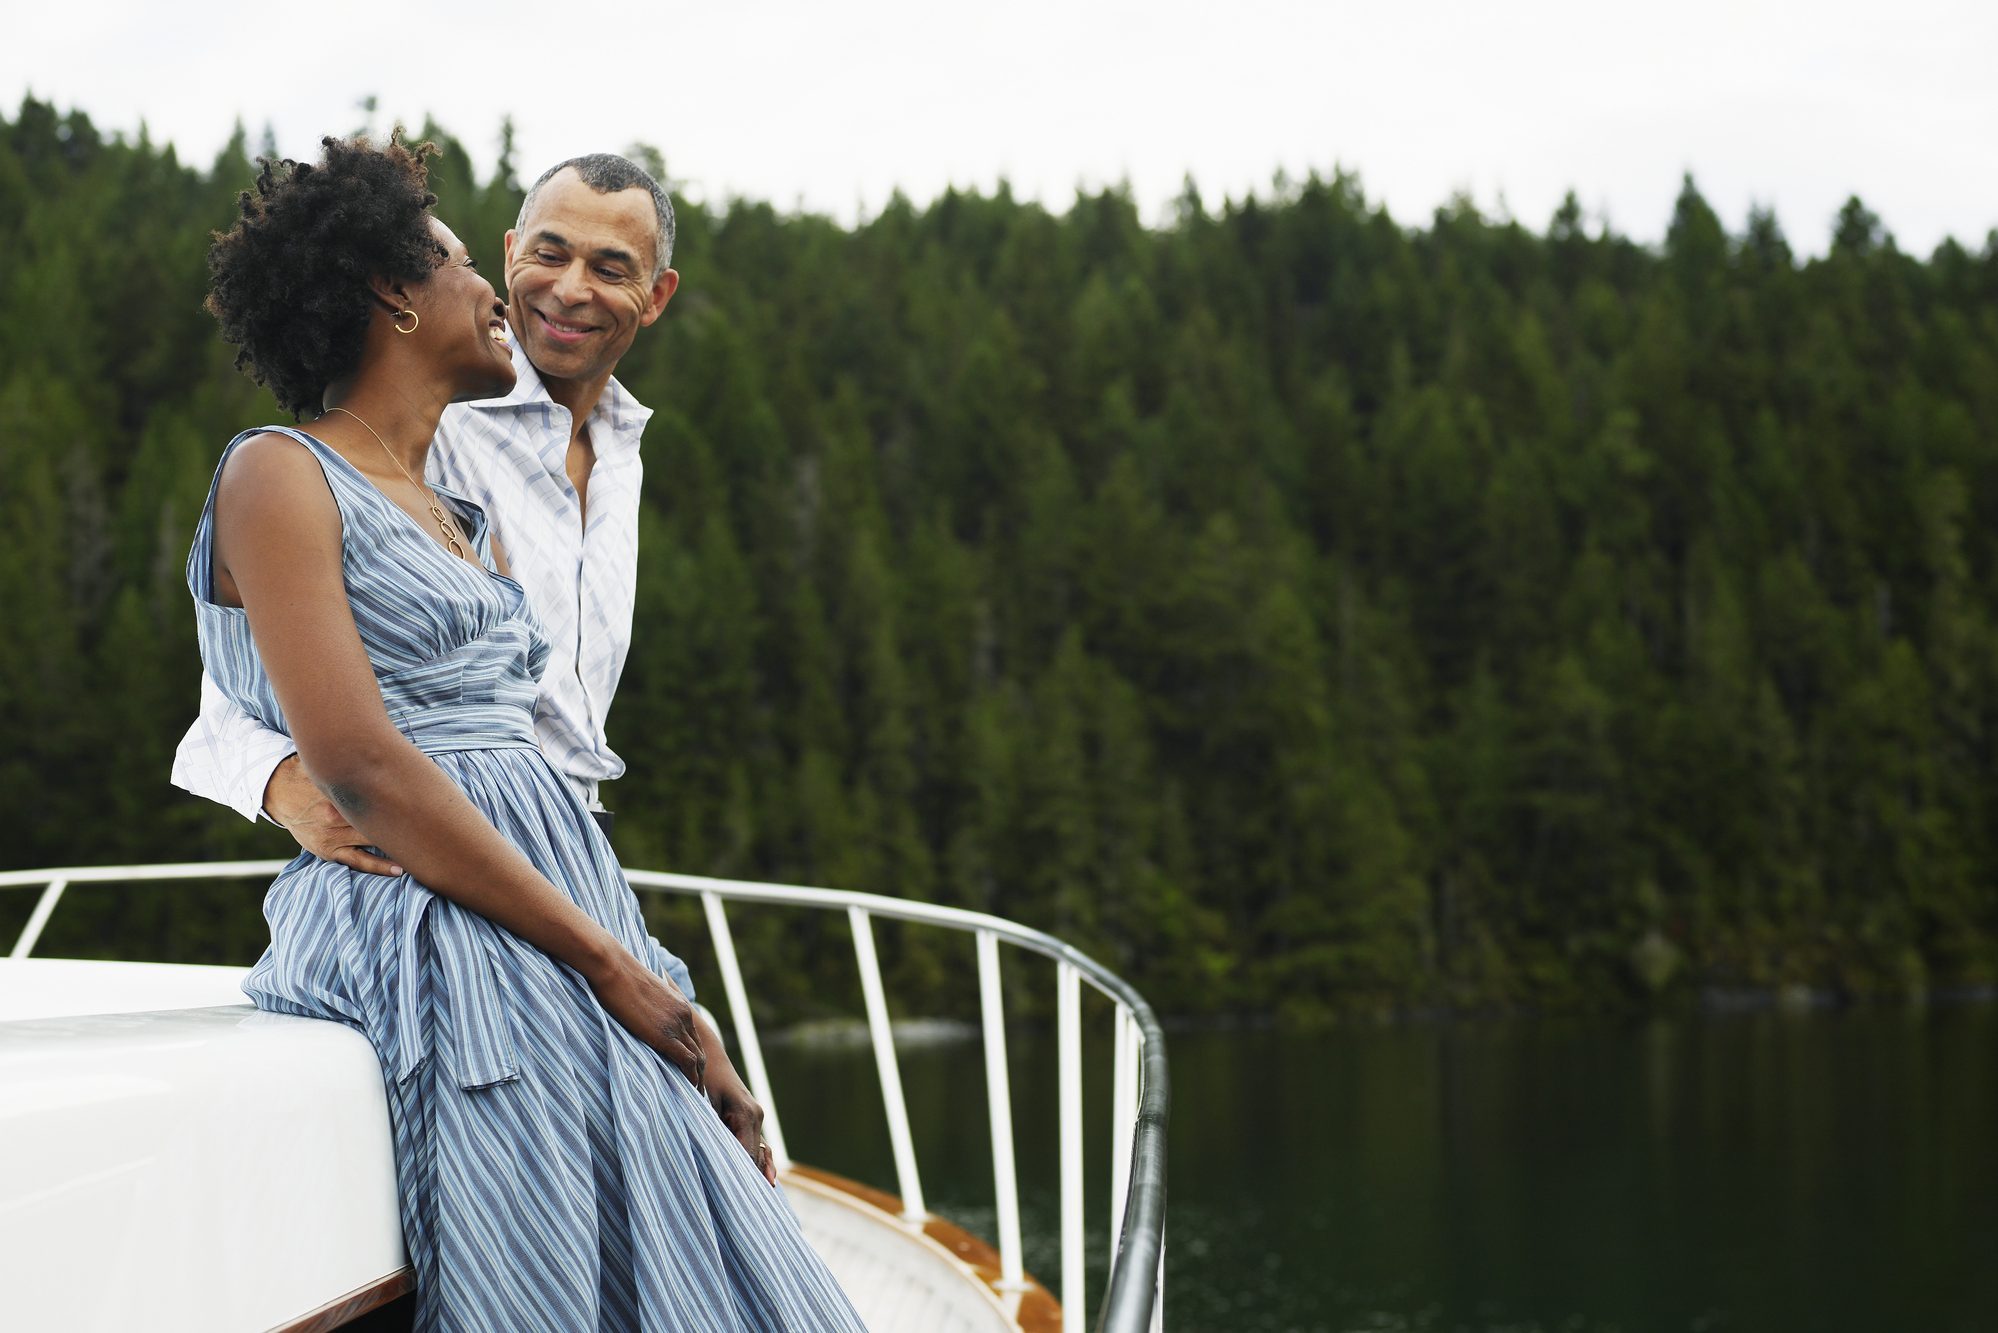 Mature man with arm around woman on yacht, smiling